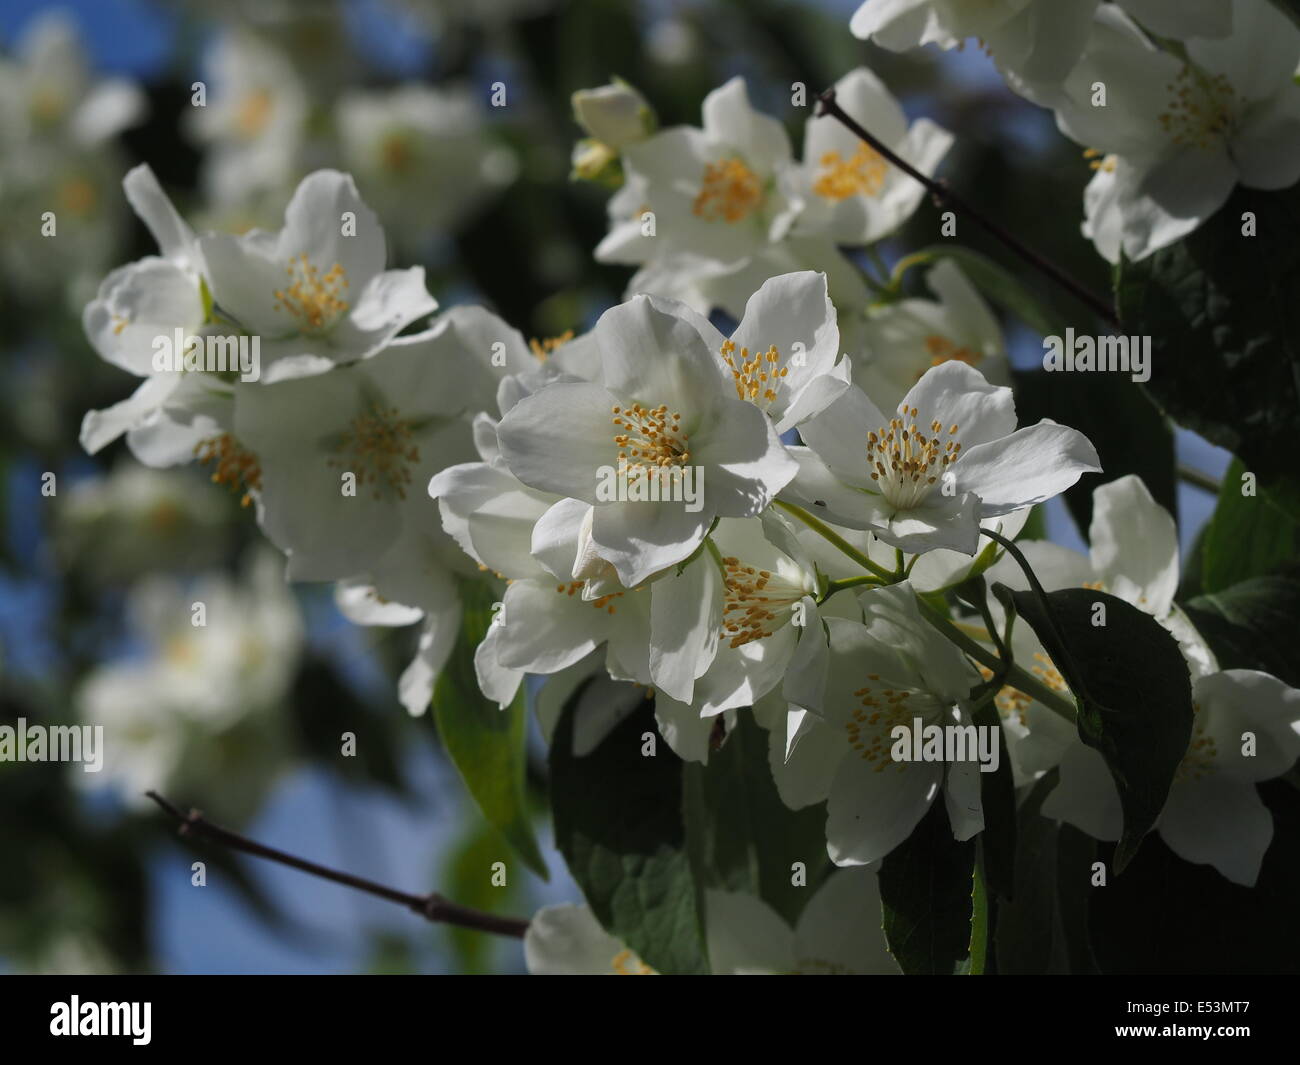 white Mock orange flowers (Philadelphus sp) with yellow stamens sunlit against blue sky and foliage Stock Photo